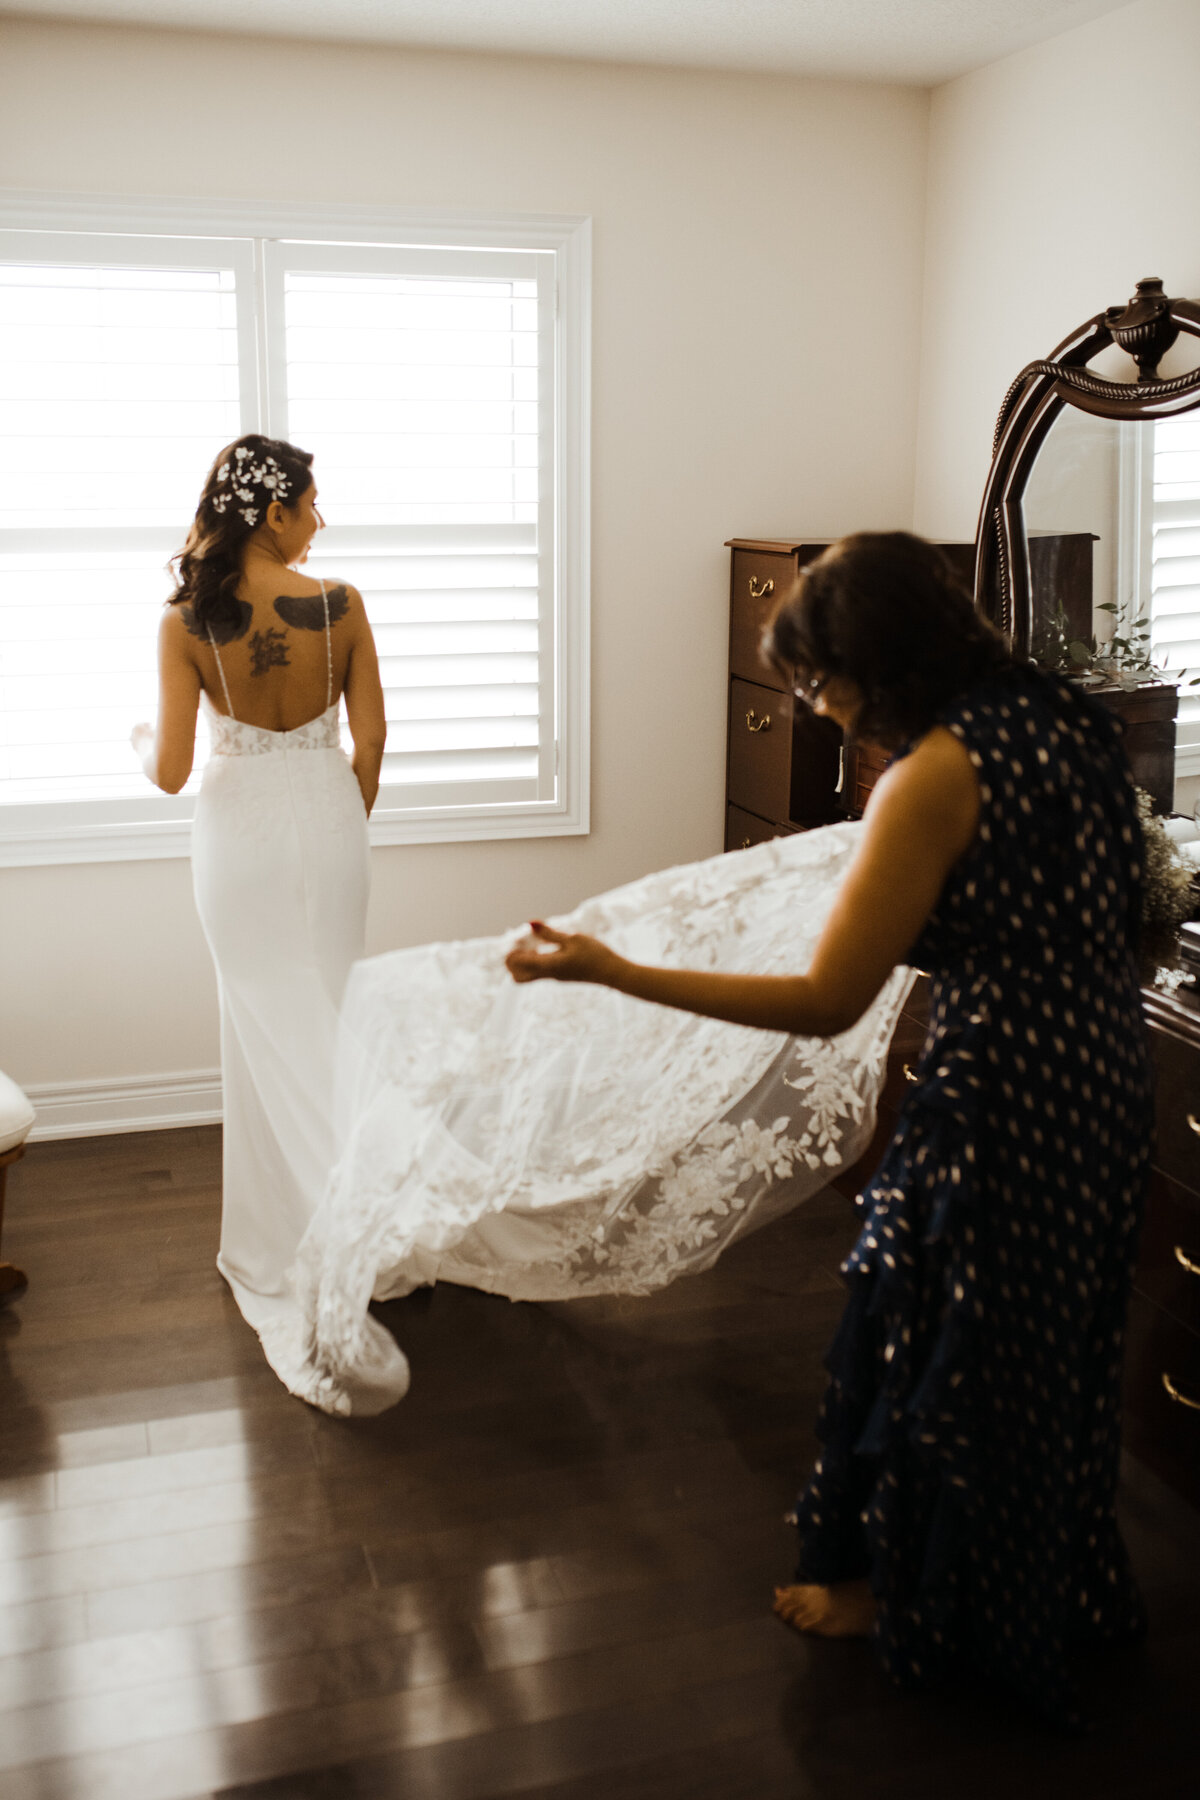 A-markham-home-covid-pandemic-diy-love-is-not-cancelled-wedding-photography-bride-getting-ready-22